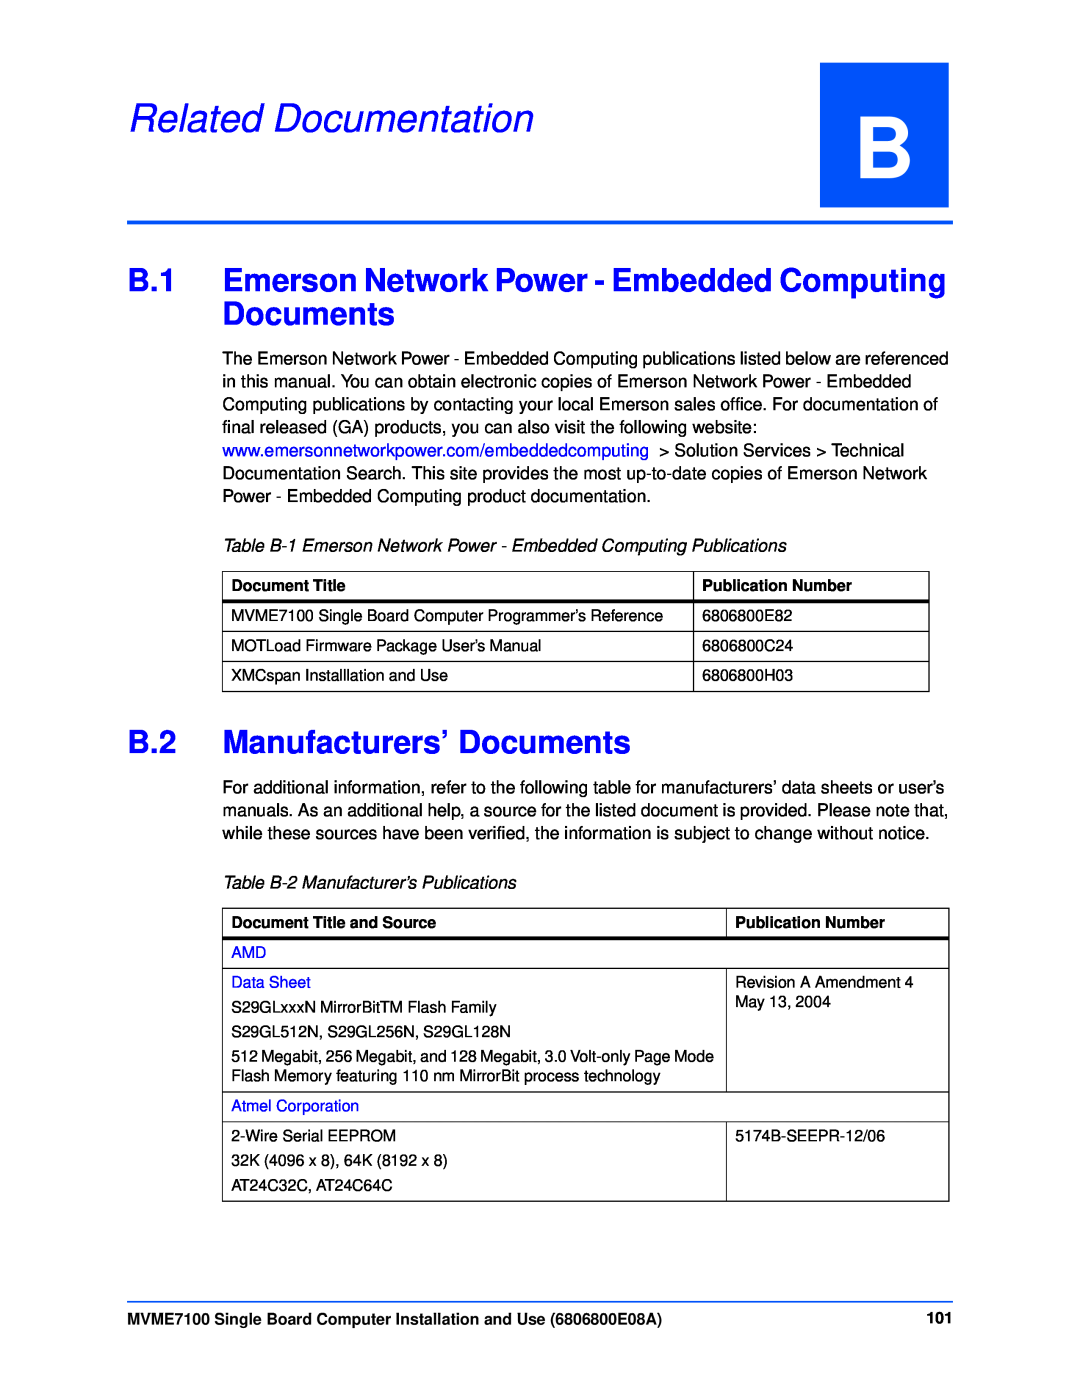 Emerson MVME7100 manual Related Documentation, B.1 Emerson Network Power - Embedded Computing Documents, Document Title 